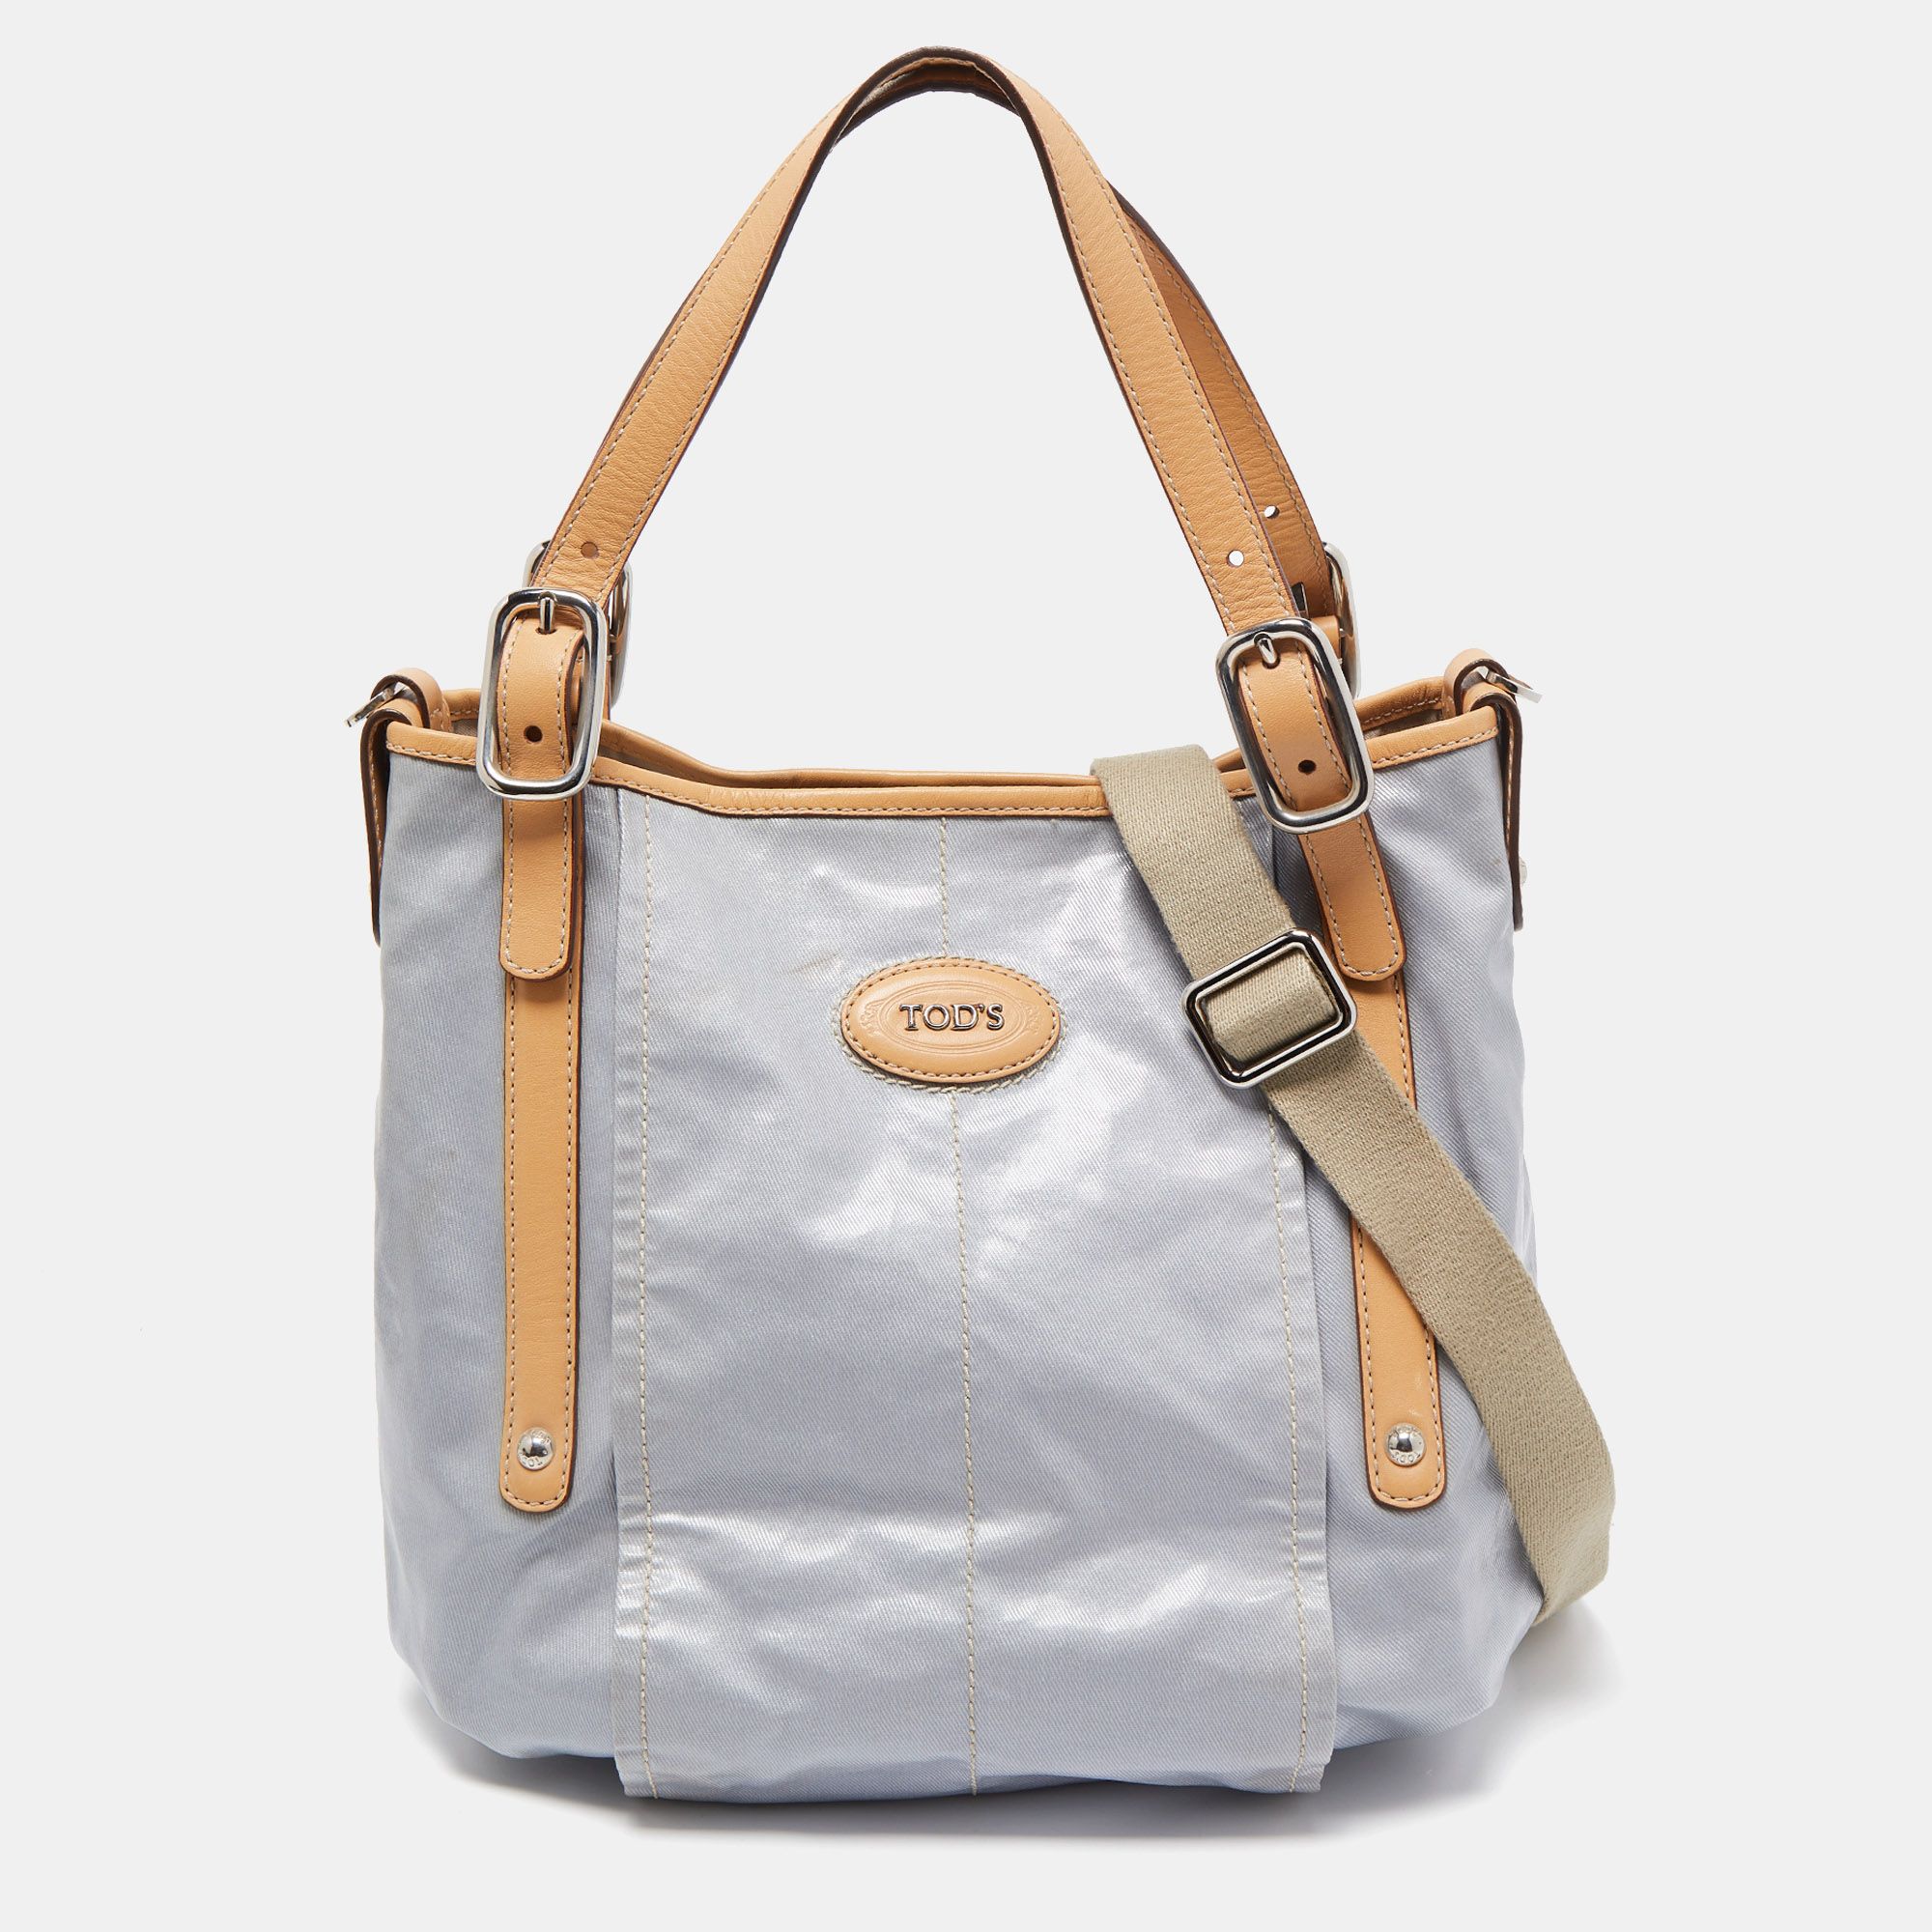 Tod's light blue/beige pvc and leather tote